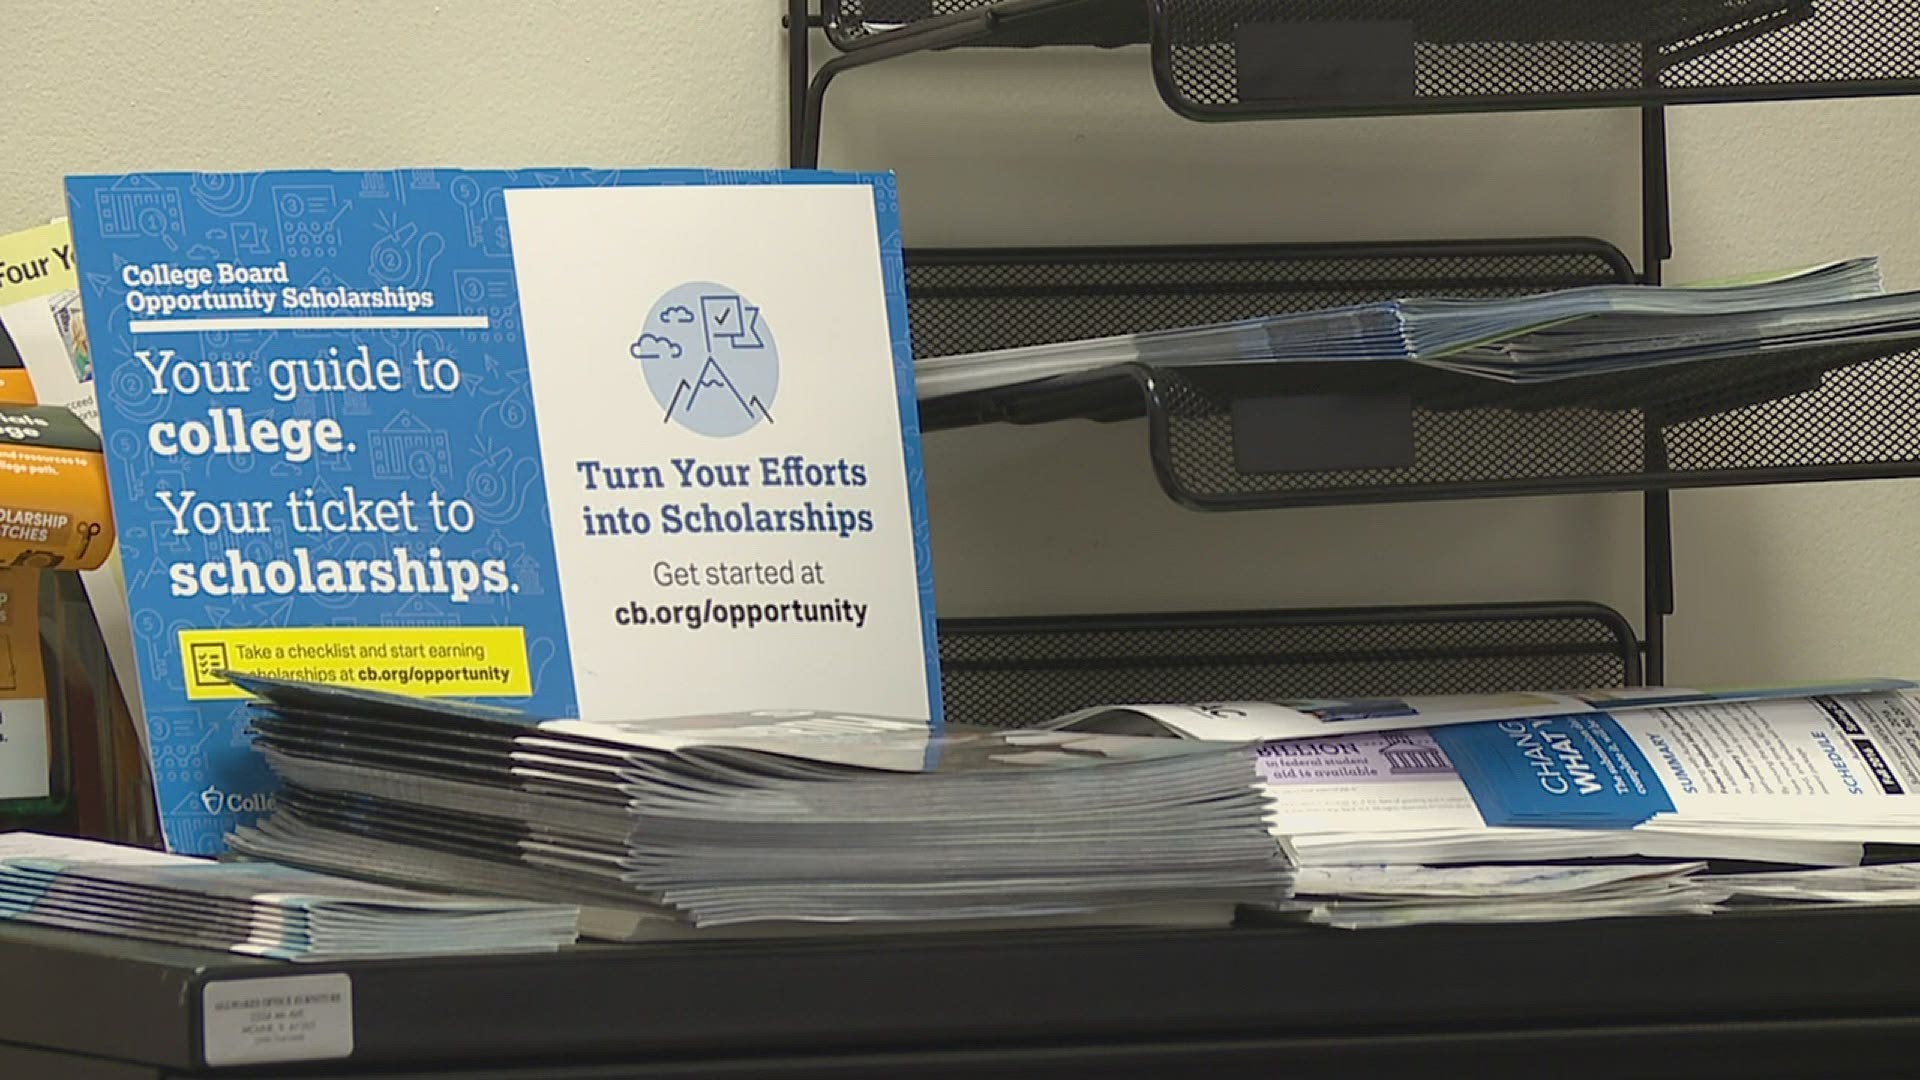 With so many resources available online, finding scholarships specifically for Black students can be a challenge. Two local organizations are finding ways to help.